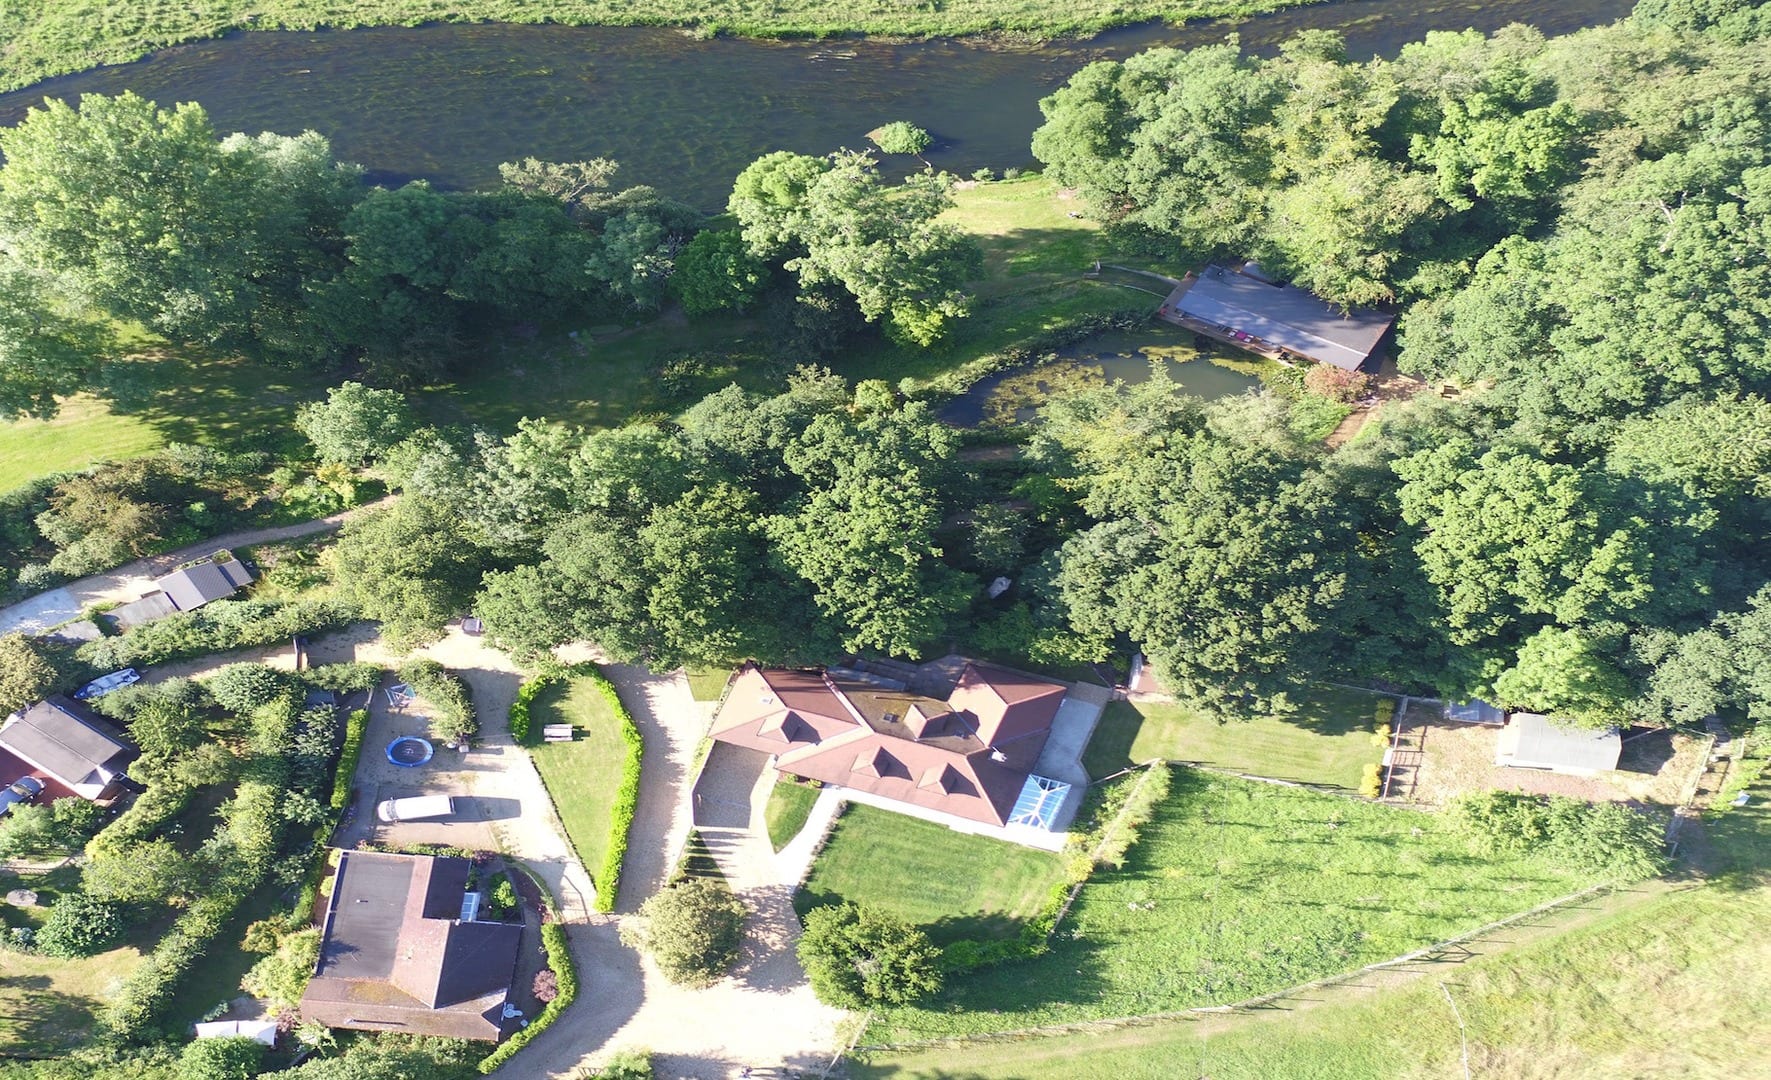 Aerial view of holiday homes by the river